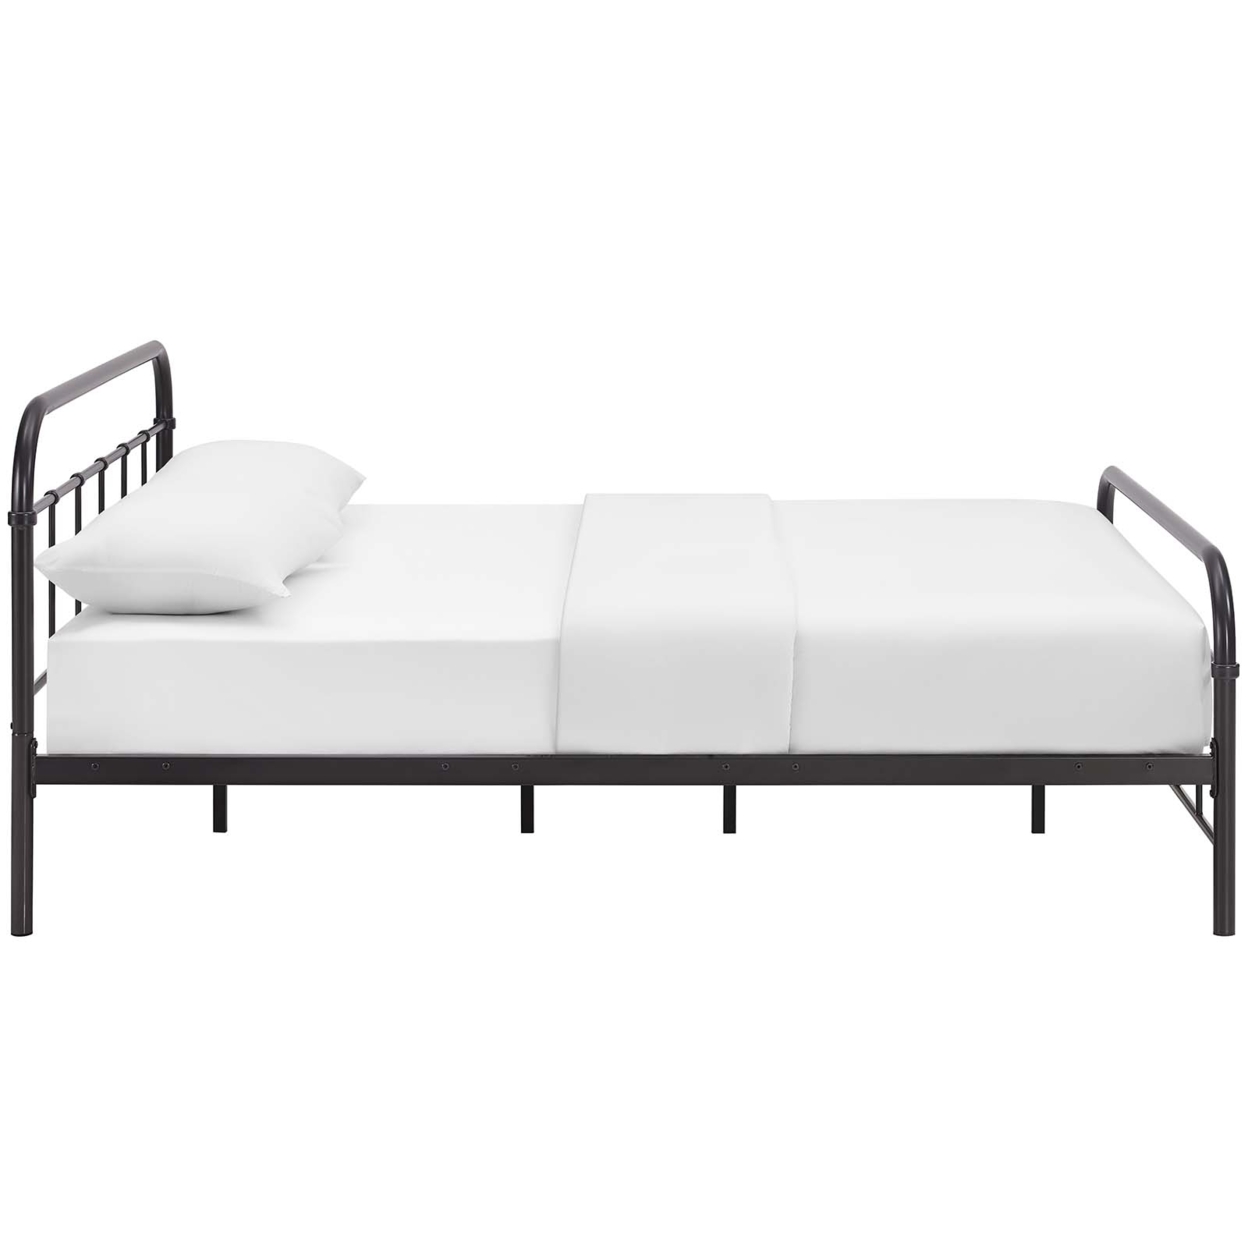 Maisie Queen Stainless Steel Bed Frame, Brown